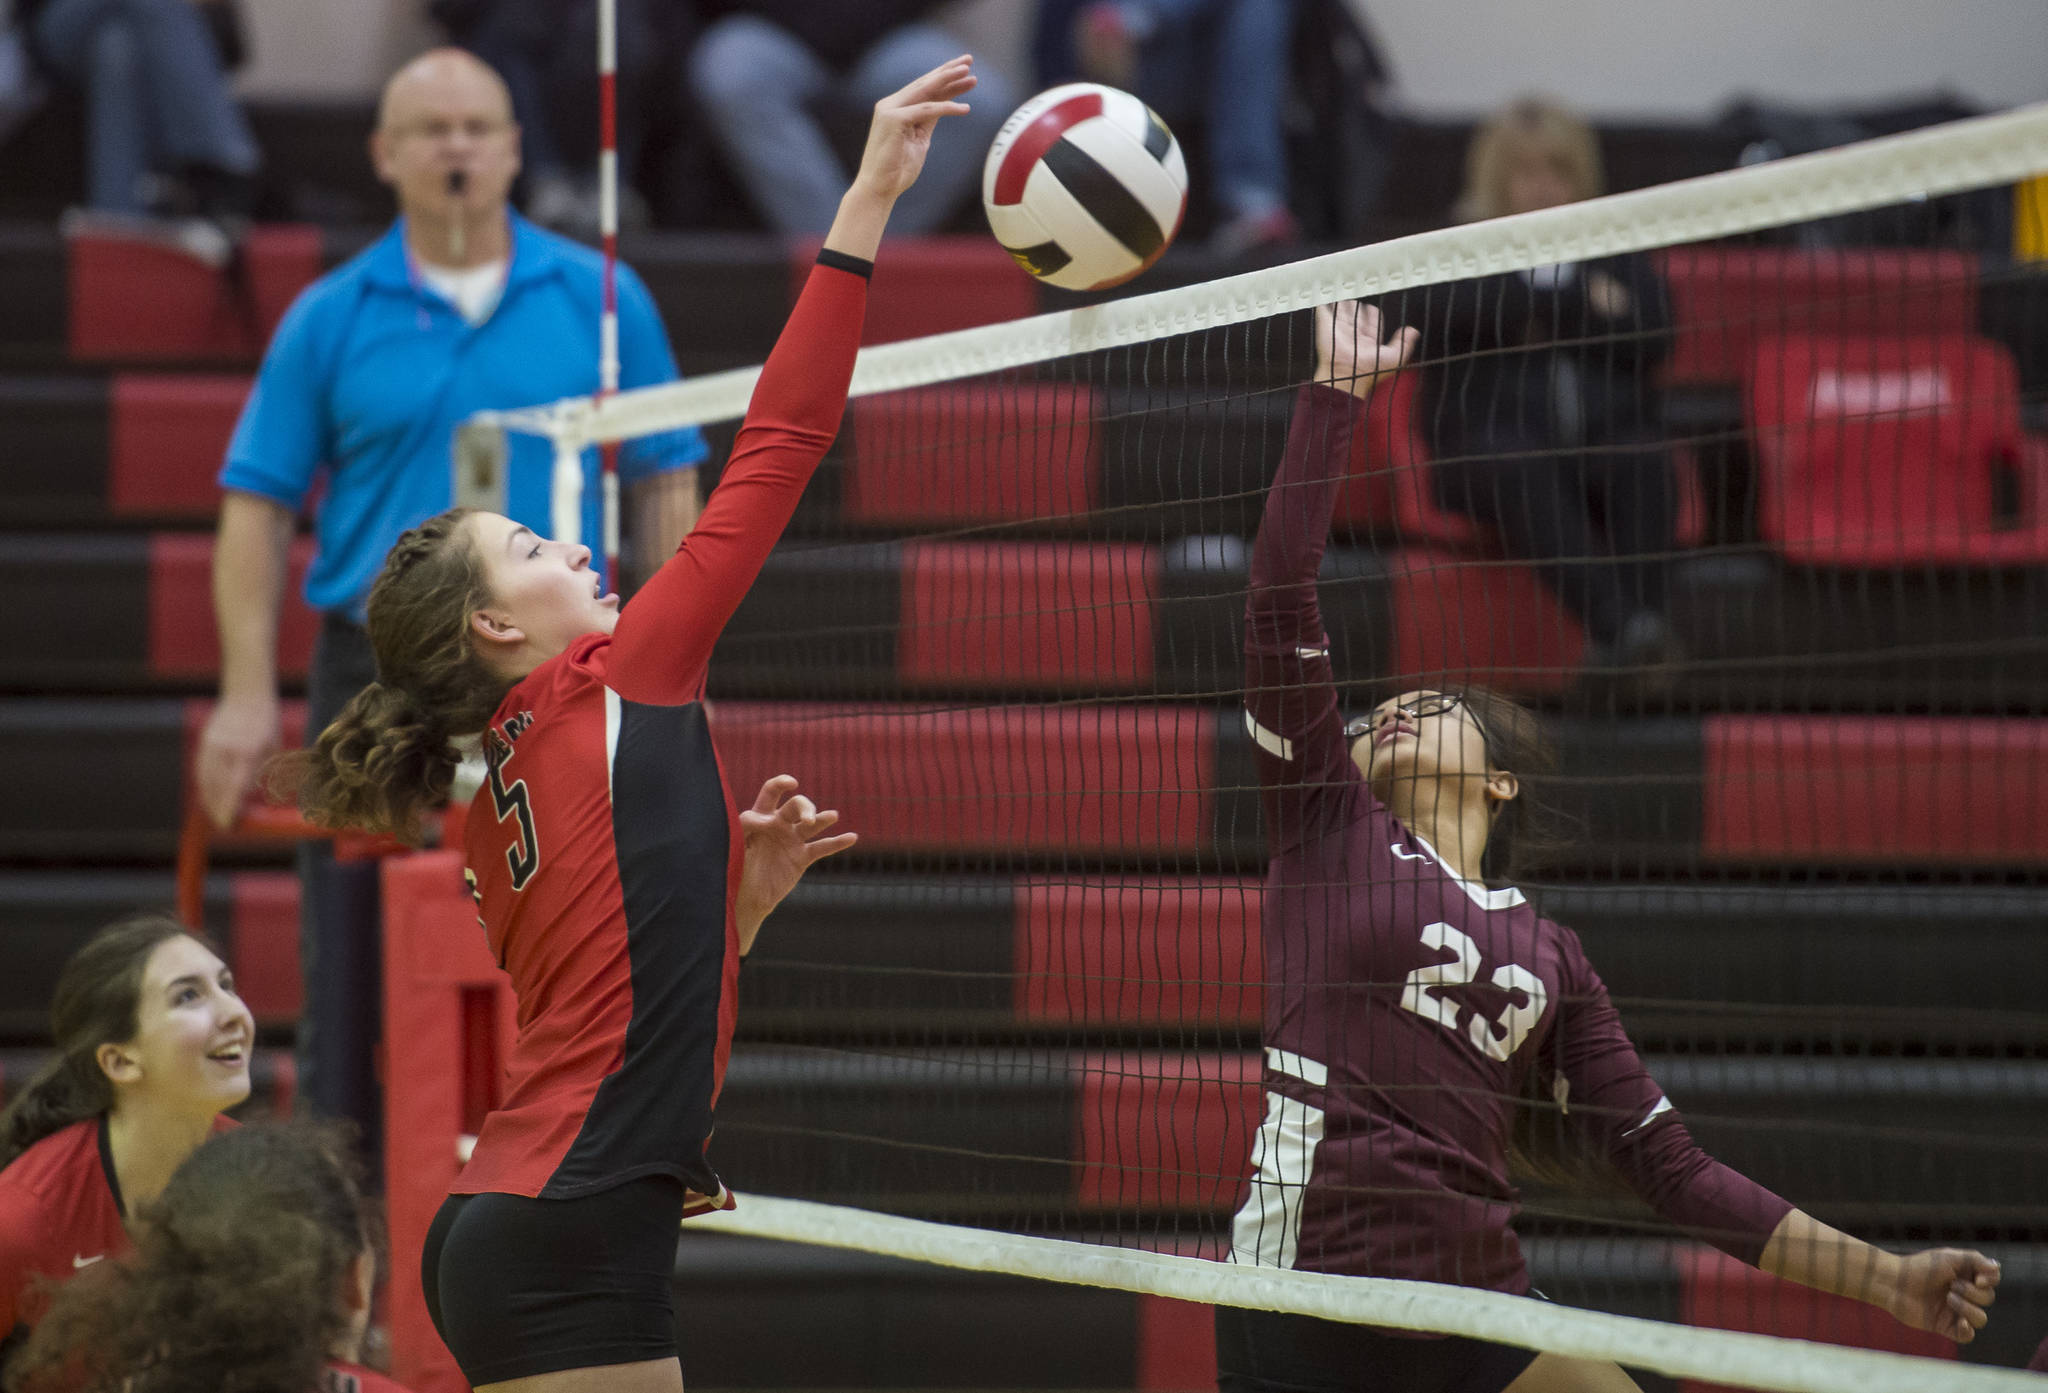 Juneau-Douglas’ JoJo Griggs puts the ball away against Ketchikan’s Karen Abigania in the first round of the Region V Volleyball Championships at JDHS on Friday, Nov. 2, 2018. JDHS won 3-0 (25-13, 25-16, 25-16). (Michael Penn | Juneau Empire)